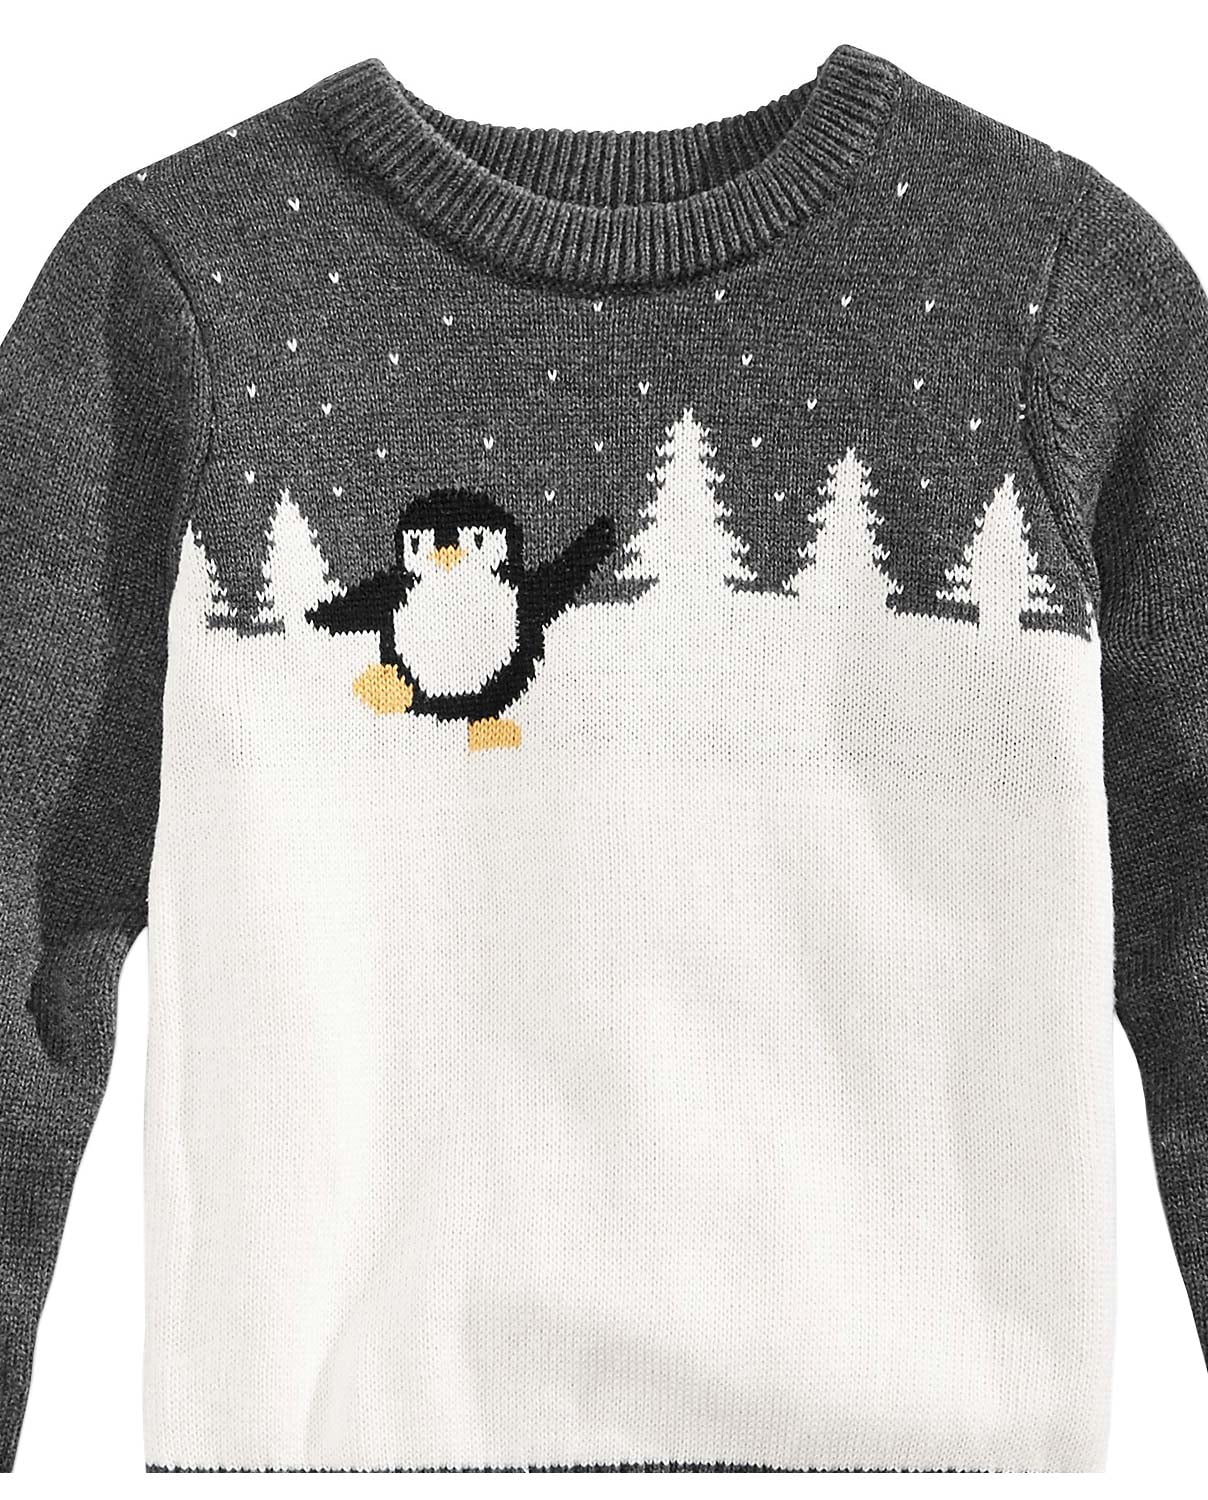  Christmas Penguin With Candy Christmas Ugly Christmas Sweater  Men Women,Penguin Ornament Sweatshirt,Cute Penguin Crewneck Shirt Party, Penguin Pattern Long-Sleeve Sweater,Penguin Crewneck Shirt,UH2266 :  Clothing, Shoes & Jewelry